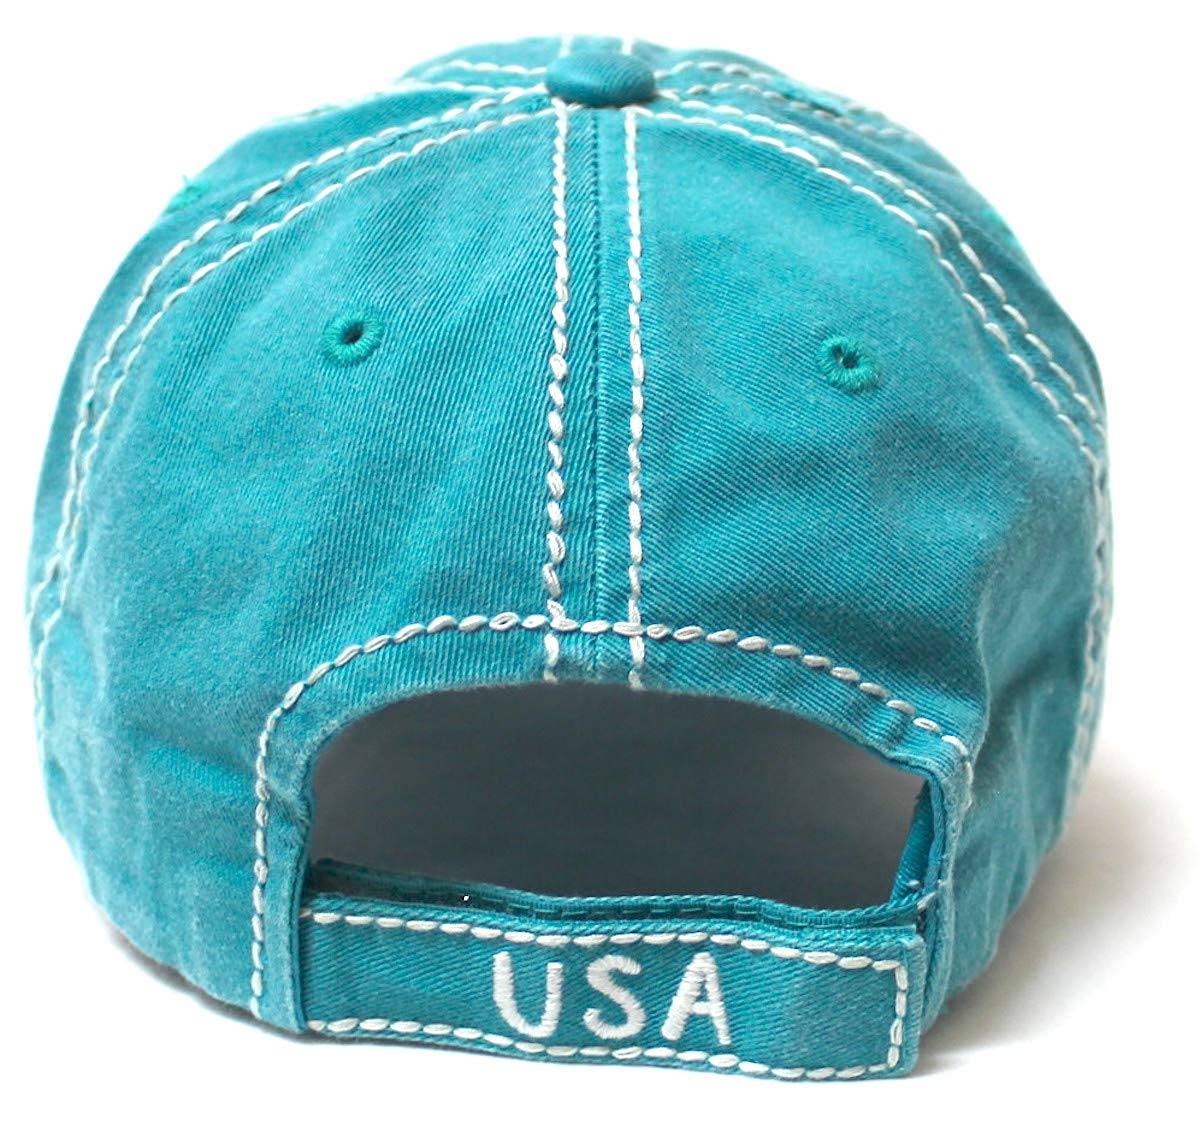 July 4 Celebratory USA Flag Patch God Bless America Embroidery Ballcap, Turquoise - Caps 'N Vintage 